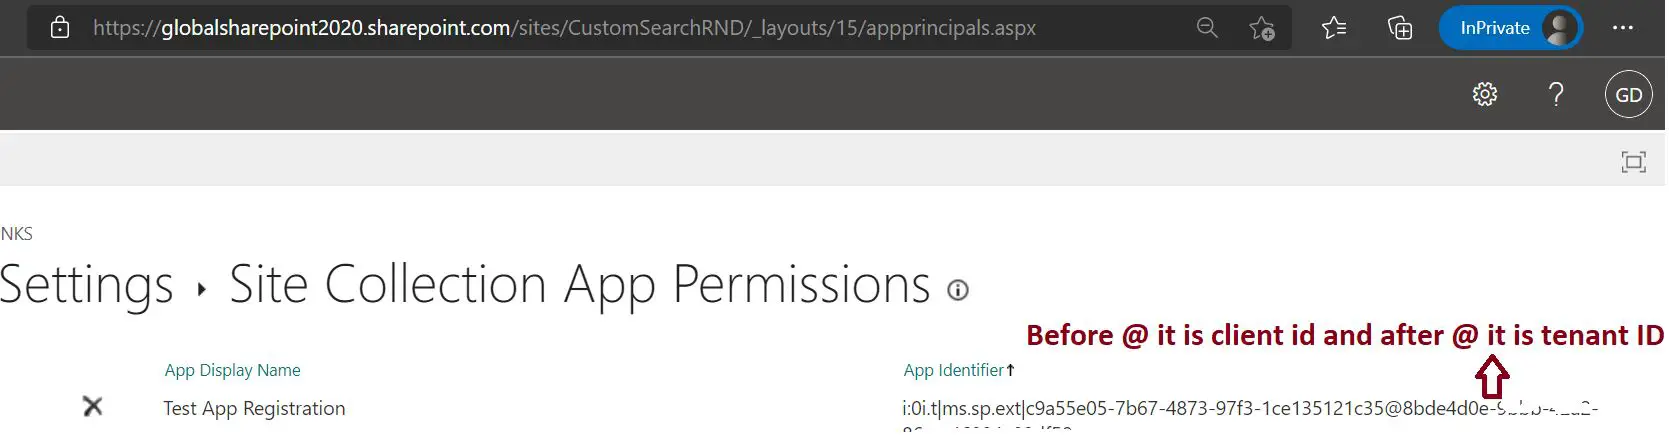 Get Tenant ID from SharePoint Online App Permissions Page